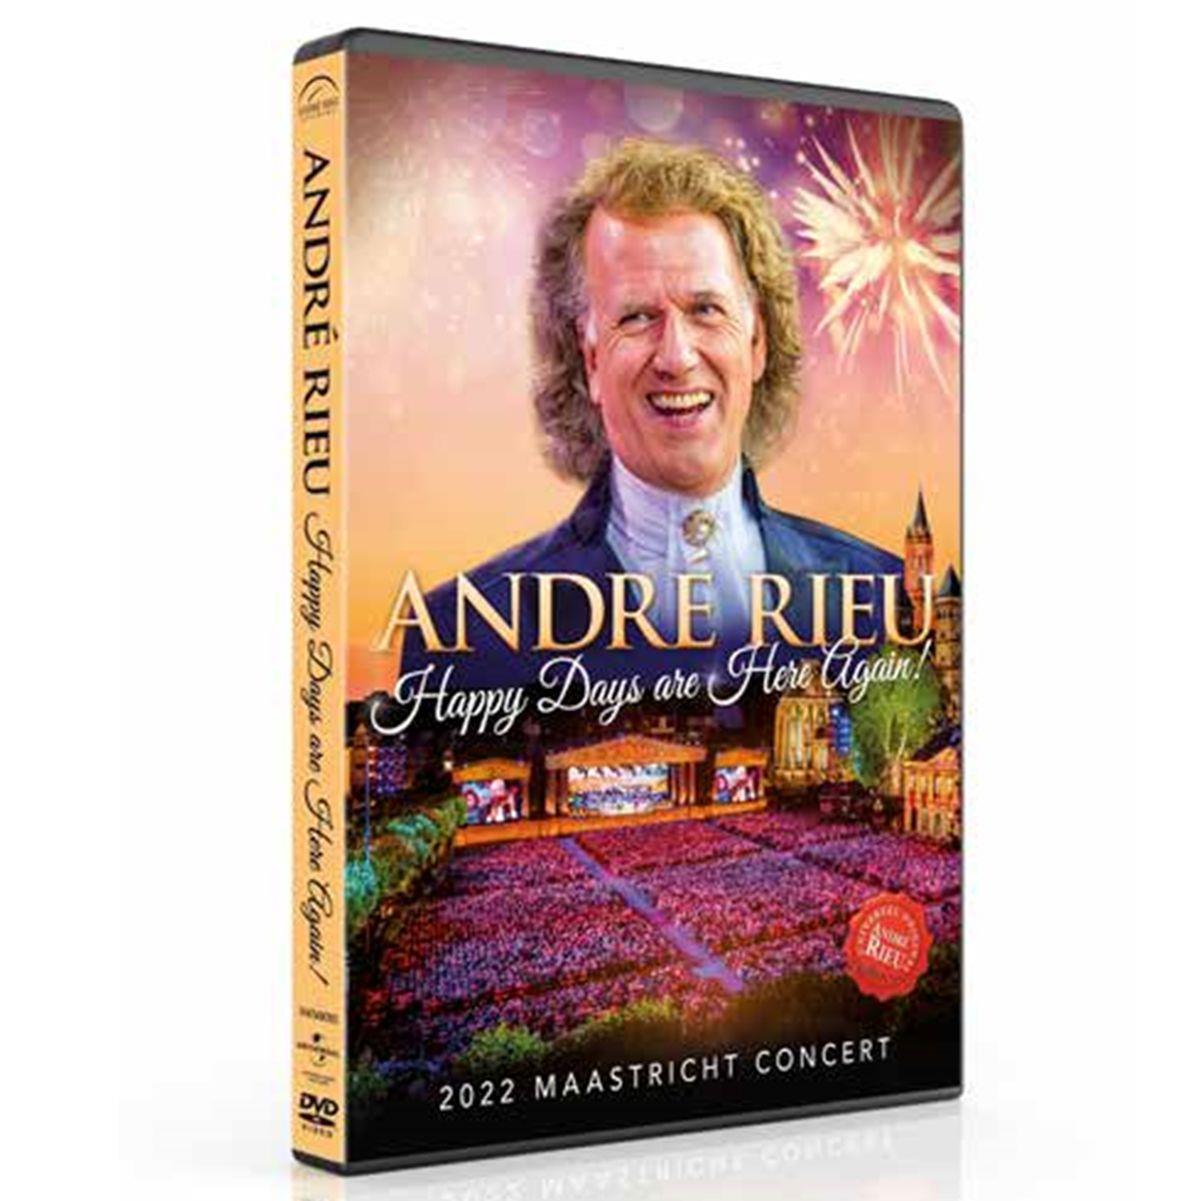 andré rieu: happy days are here again (dvd)